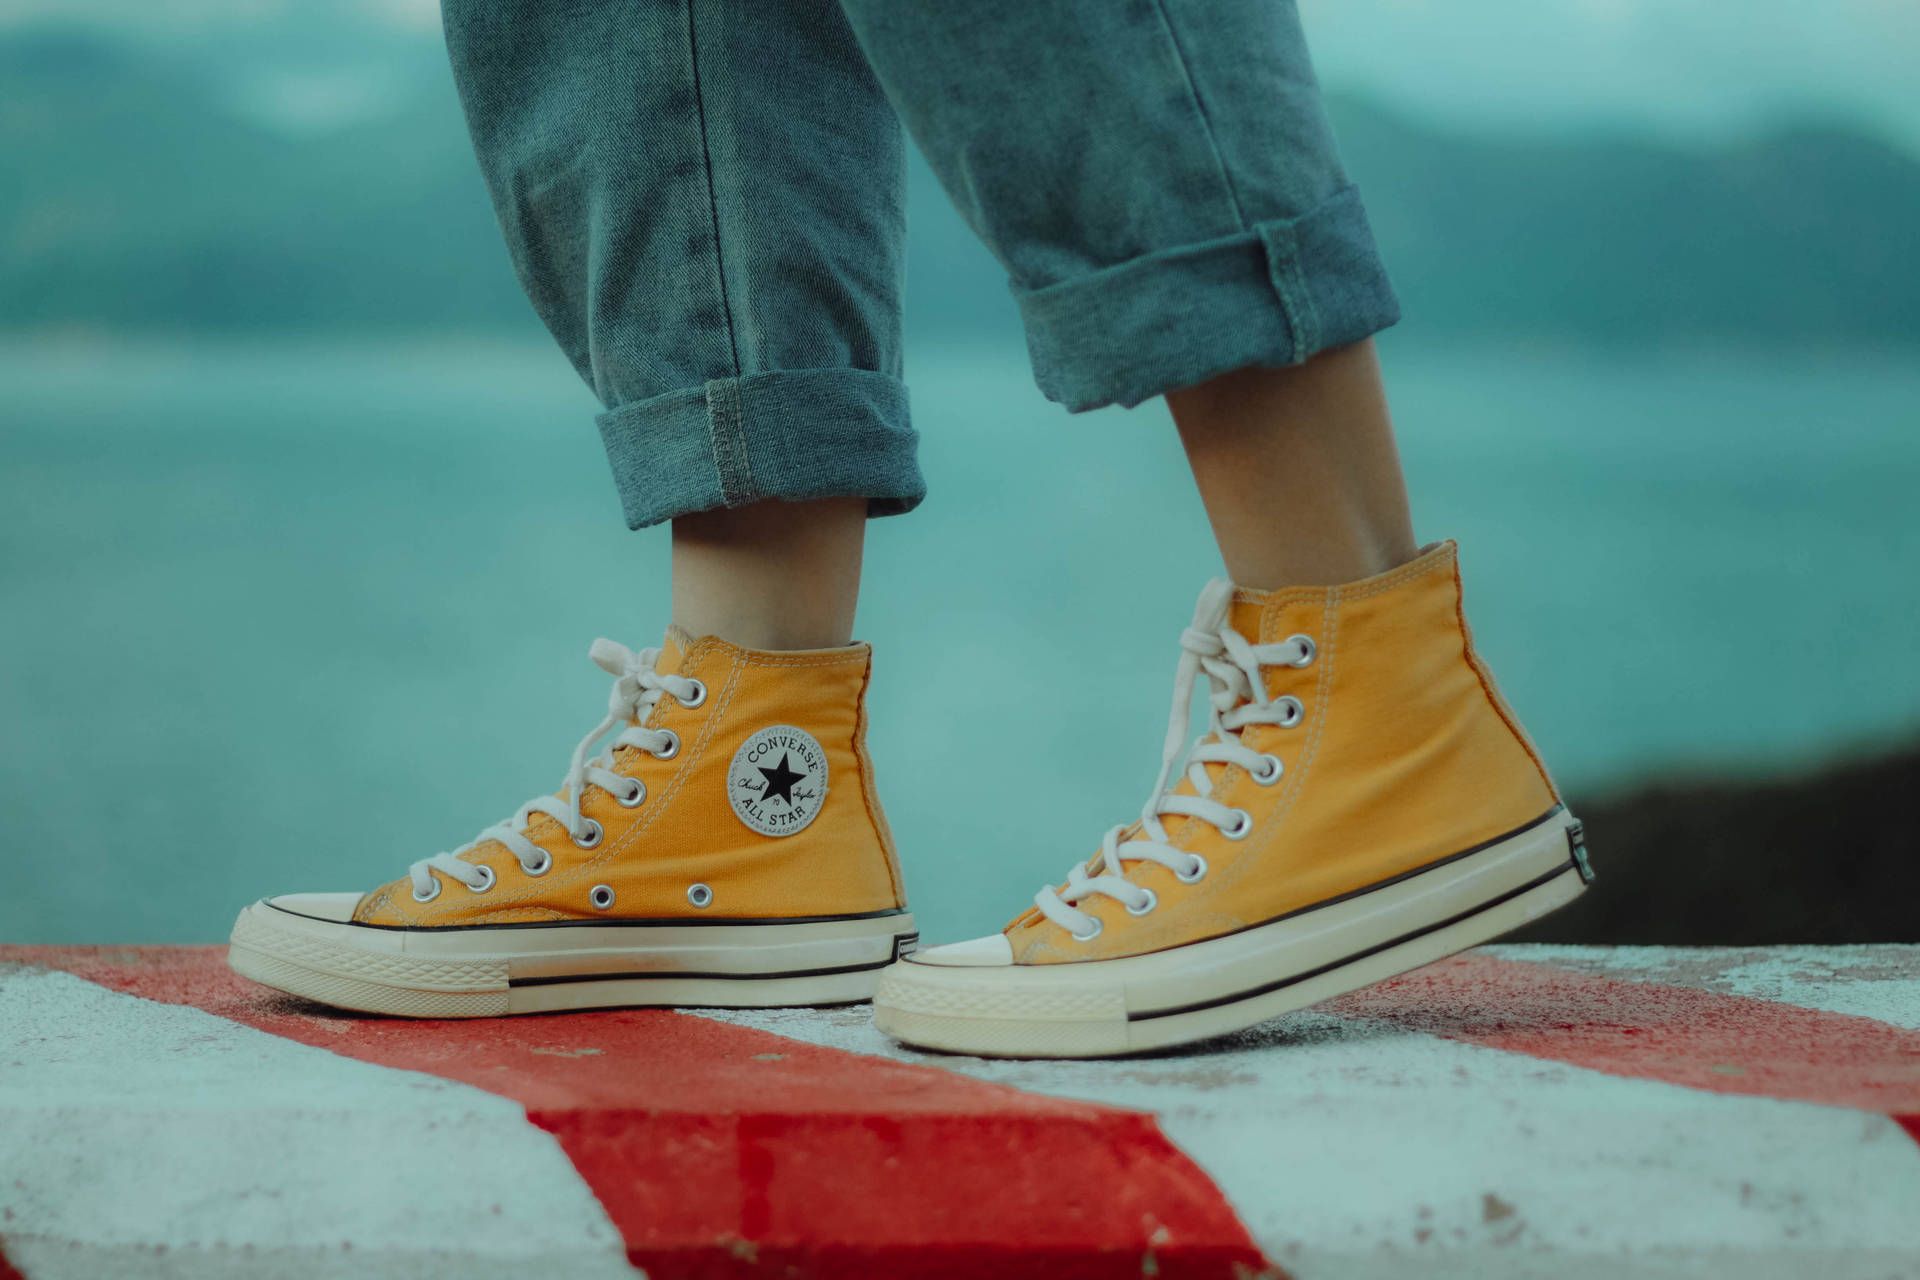 A person wearing yellow converse shoes standing on the edge of something - Shoes, Converse